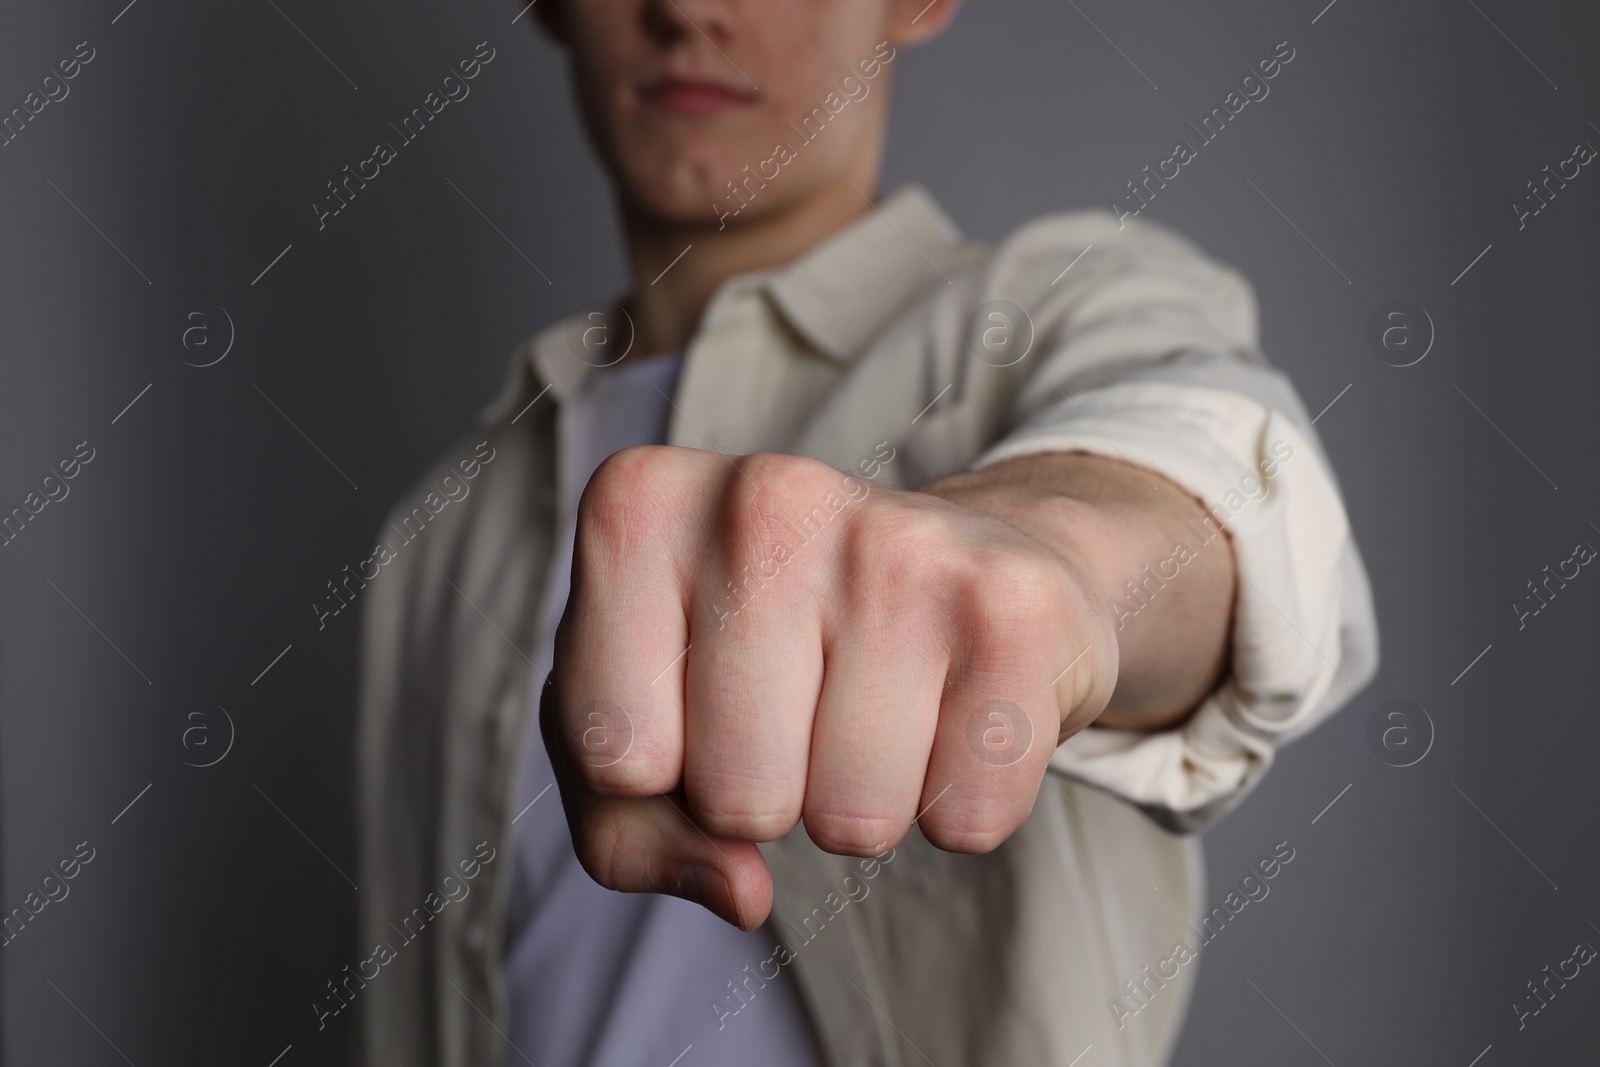 Photo of Man showing fist with space for tattoo on grey background, selective focus